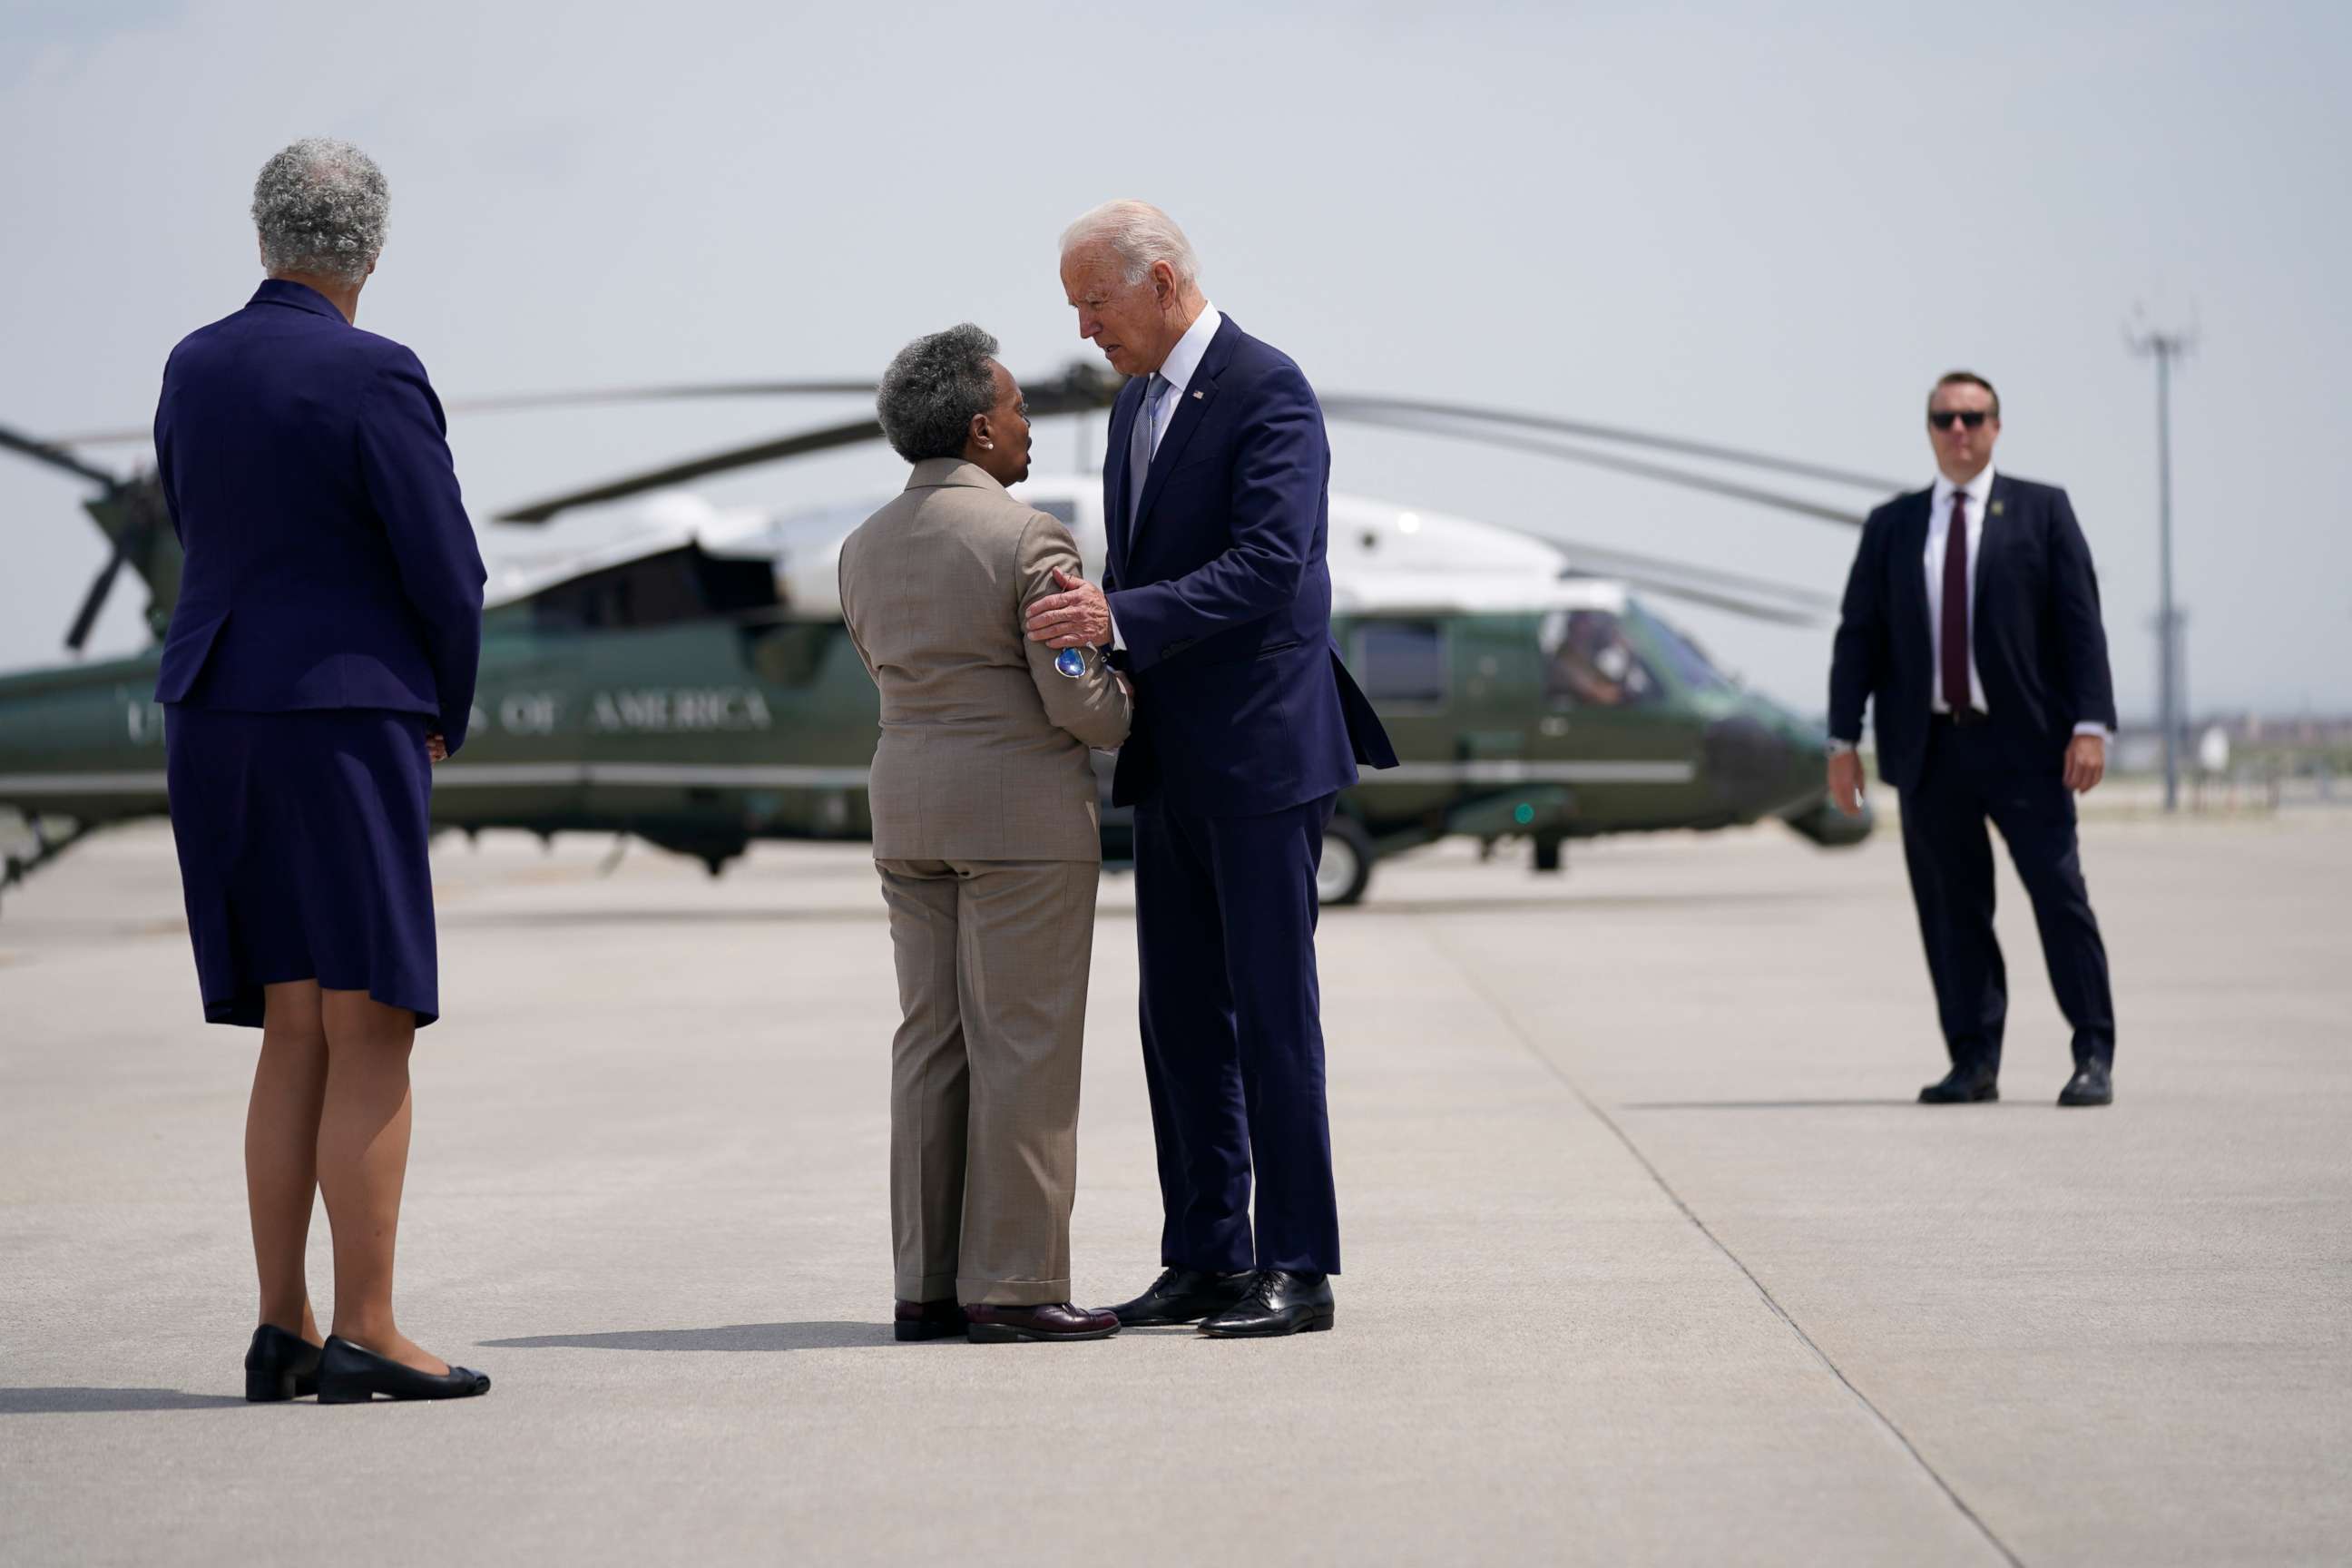 PHOTO: President Joe Biden is greeted by Cook County Board of Commissioners President Toni Preckwinkle, left, and Chicago Mayor Lori Lightfoot at O'Hare International Airport, July 7, 2021, in Chicago.